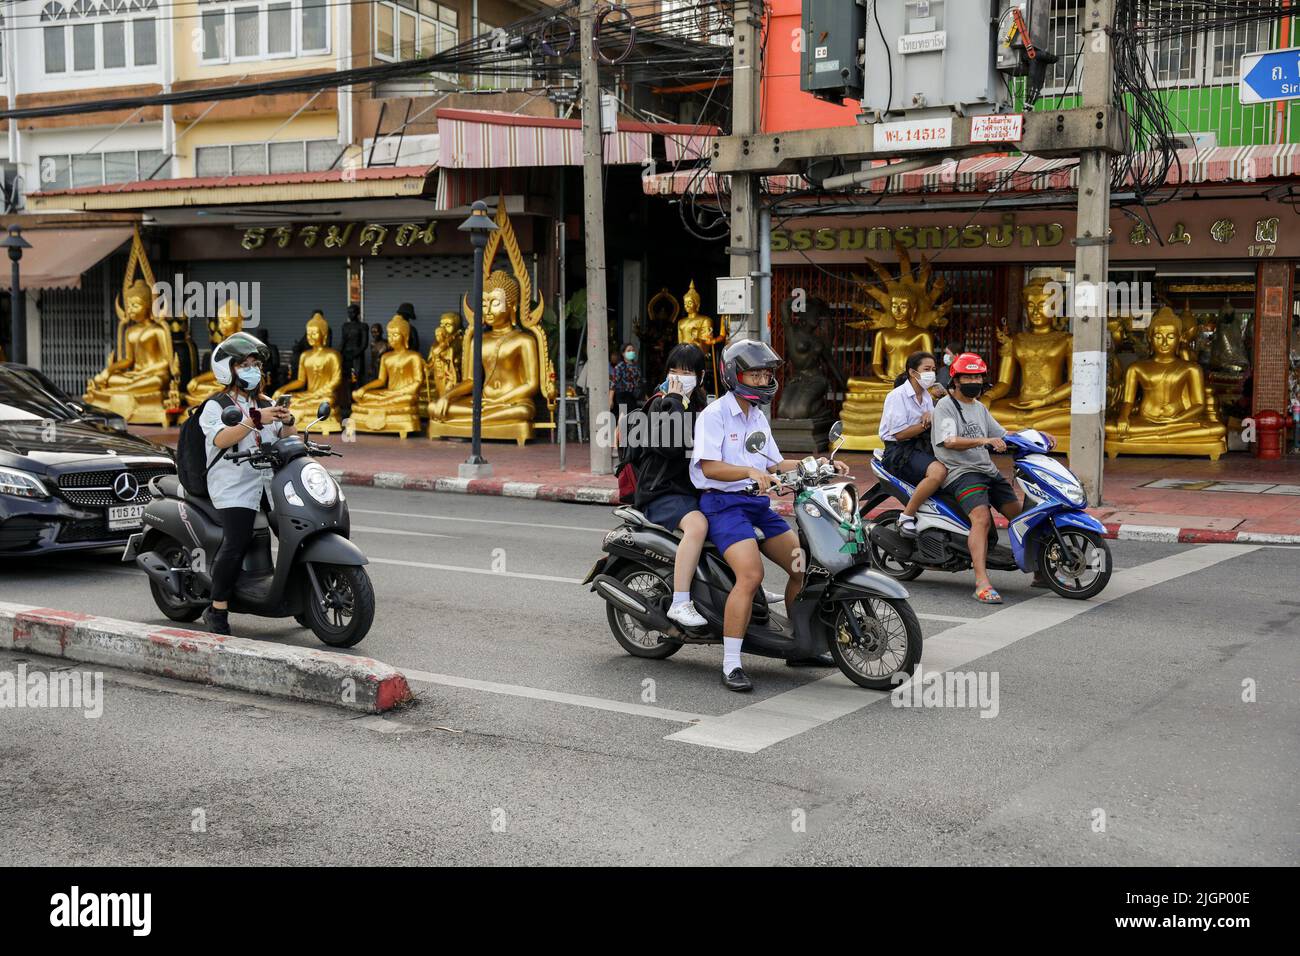 Motorists pass by statues of Buddha along a street inside the compound of the Grand Palace in Bangkok. Thailand continues to ease restrictions to boost its tourism despite the a global pandemic and new waves of coronavirus cases. Thailand. Stock Photo